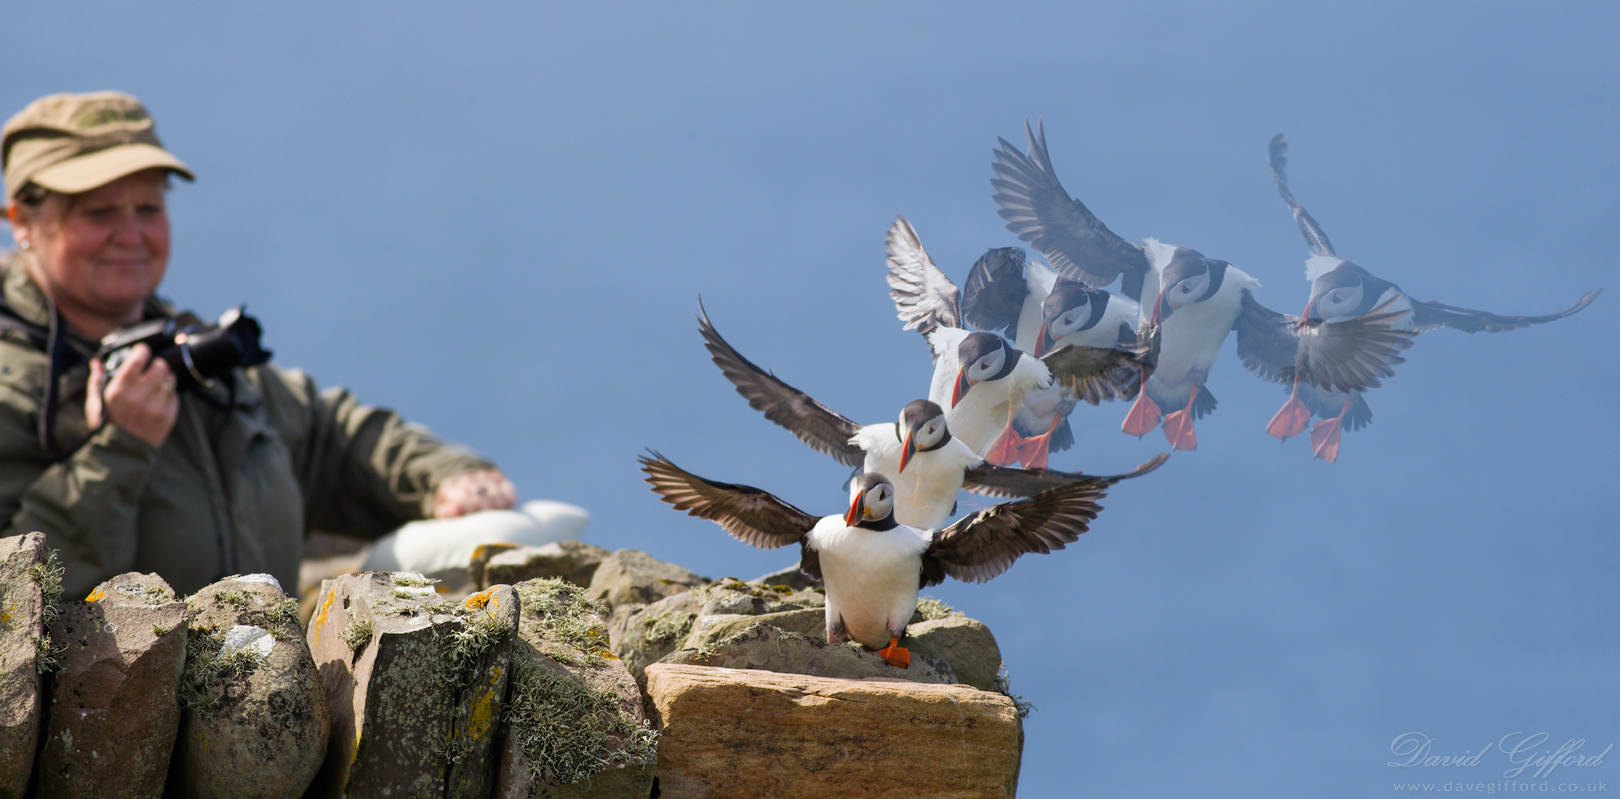 Photo: Puffin Photo Opportunity